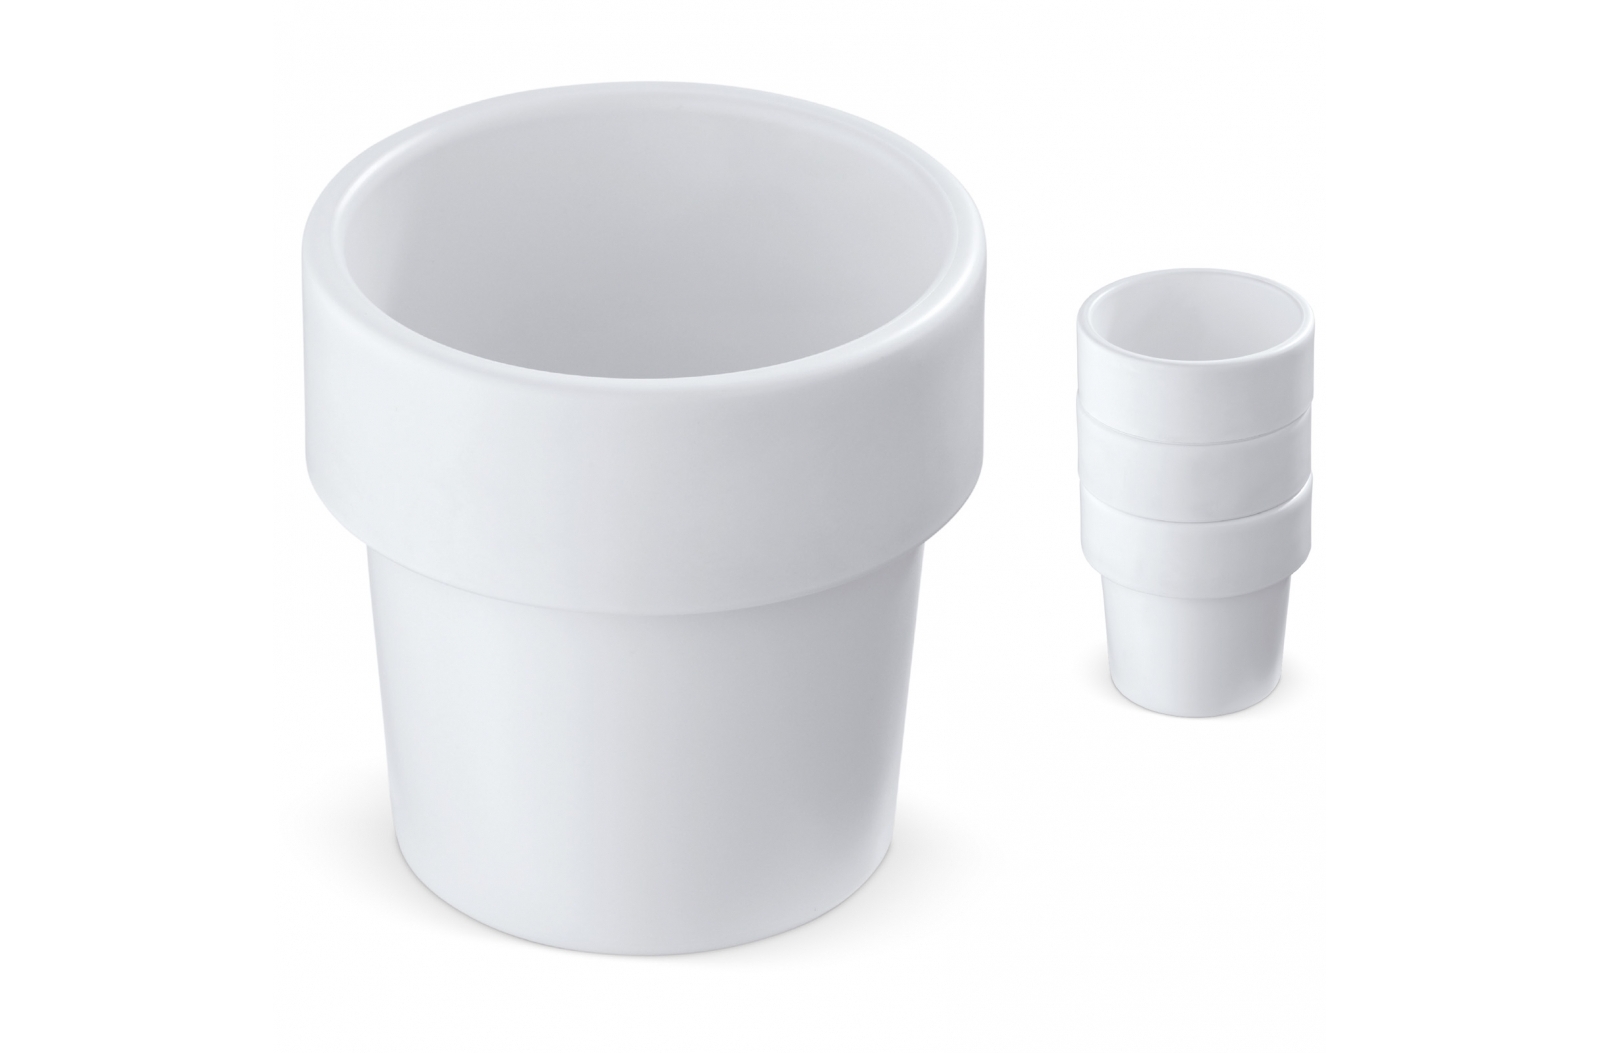 High-Quality European Bio-Plastic Cup made from Sugarcane - Entwistle